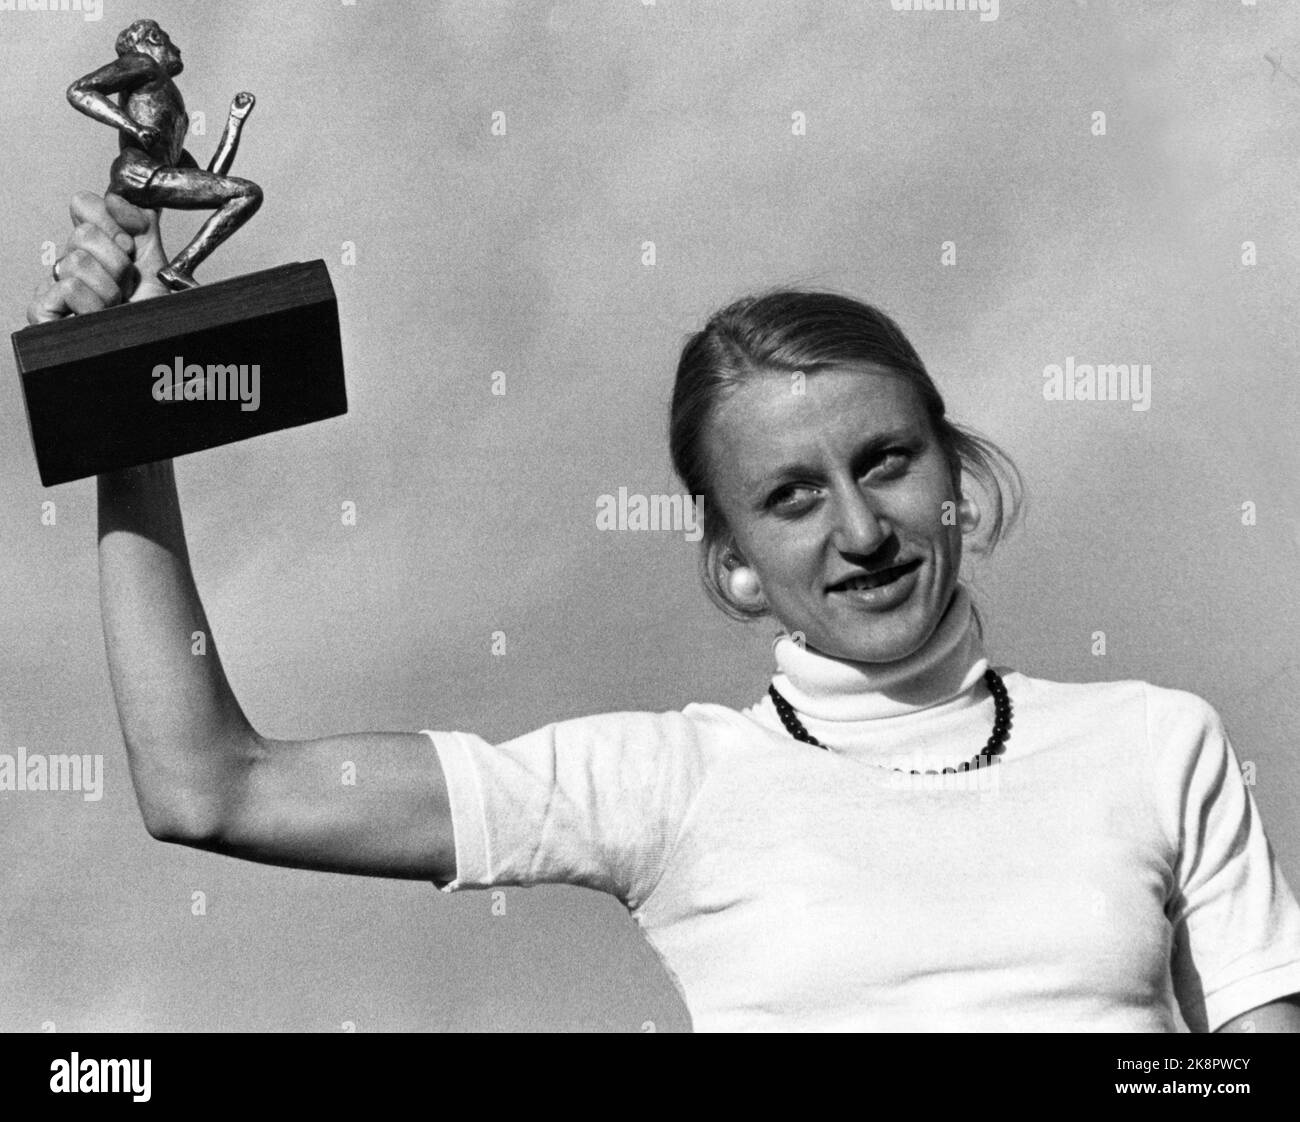 Oslo 19760622: Athletics Conference at Bislett. Athlete Grete Waitz is honored with the sports journalists' statuette for 1975. Here Waitz with the statuette. Photo: / NTB / NTB Stock Photo